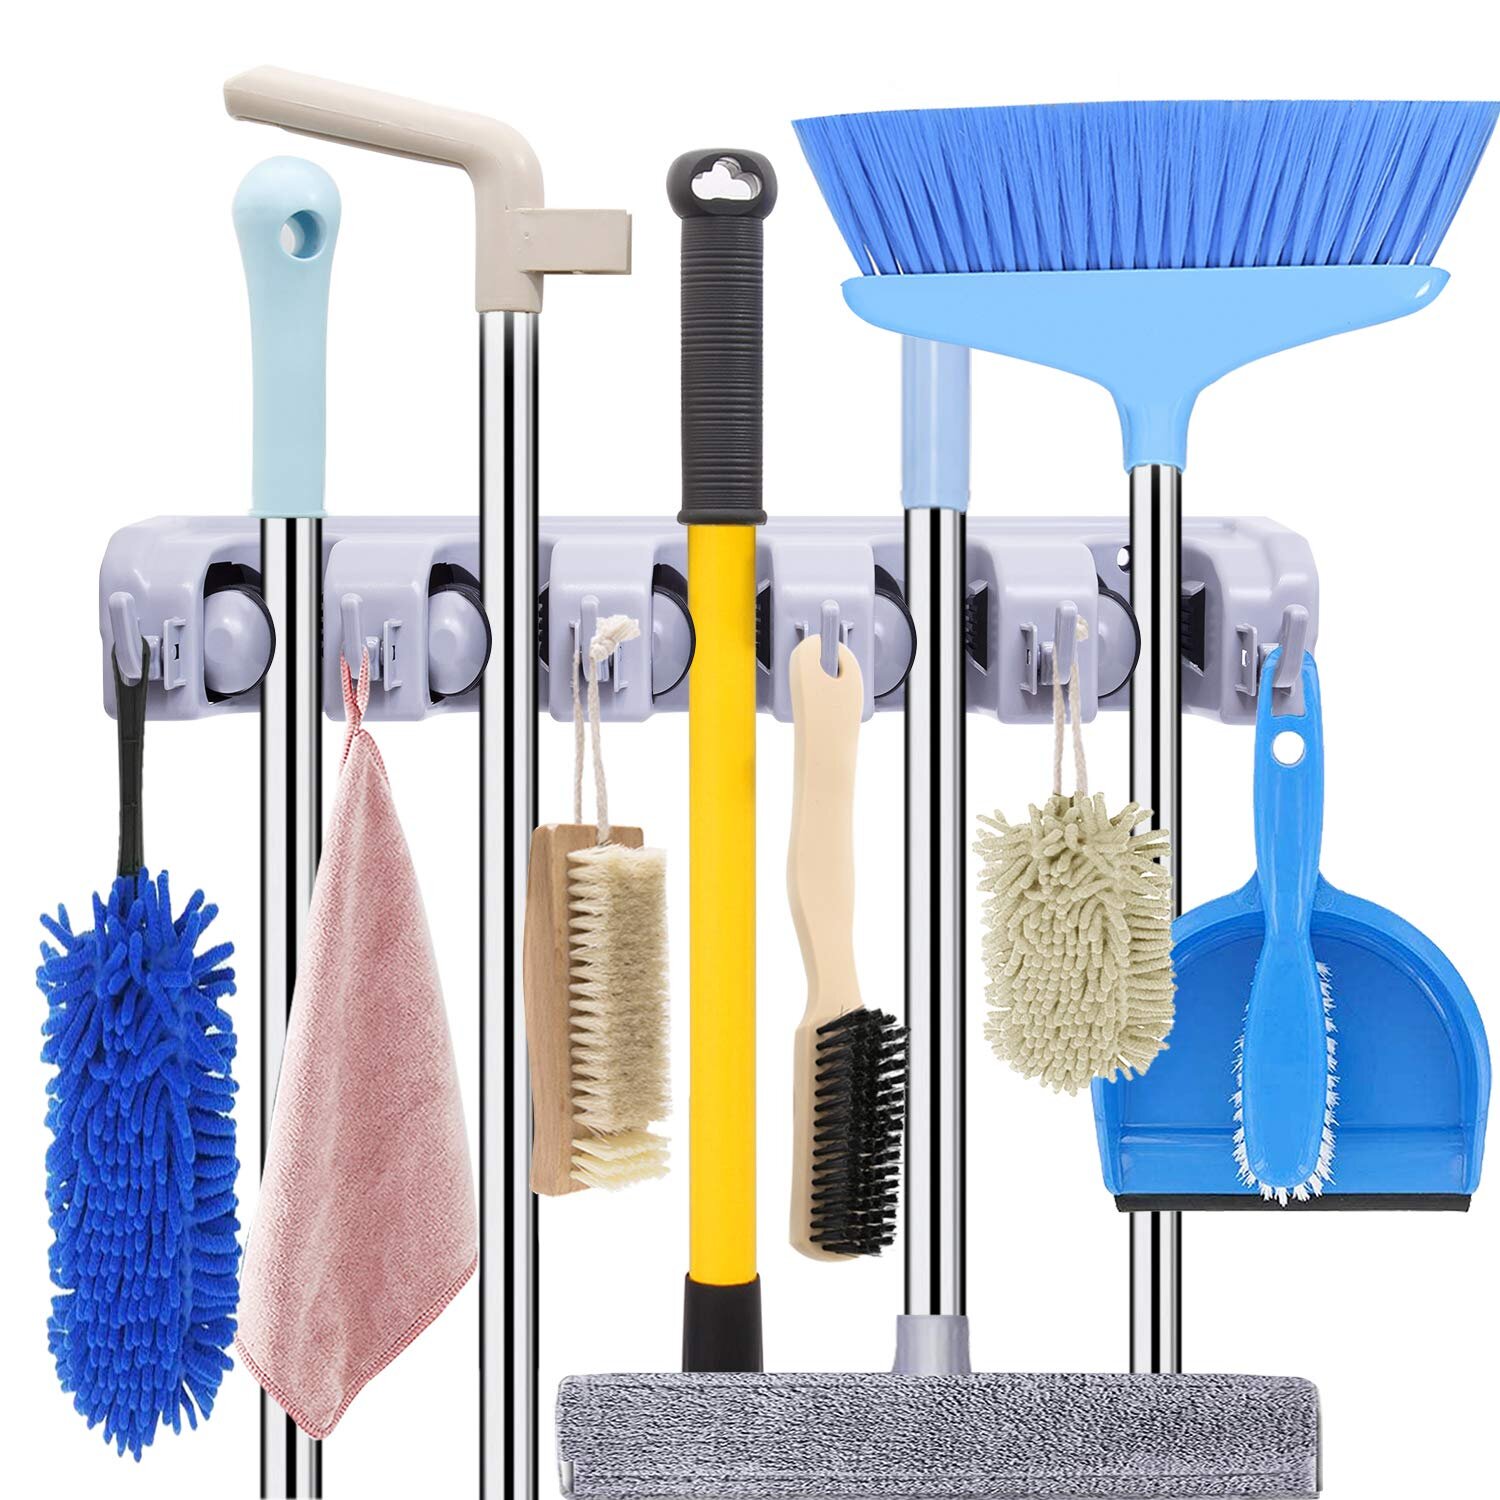 Wall Mount Magic Mop and Broom Holder Plastic Hanger Brush Cleaning Tool Rack XZ